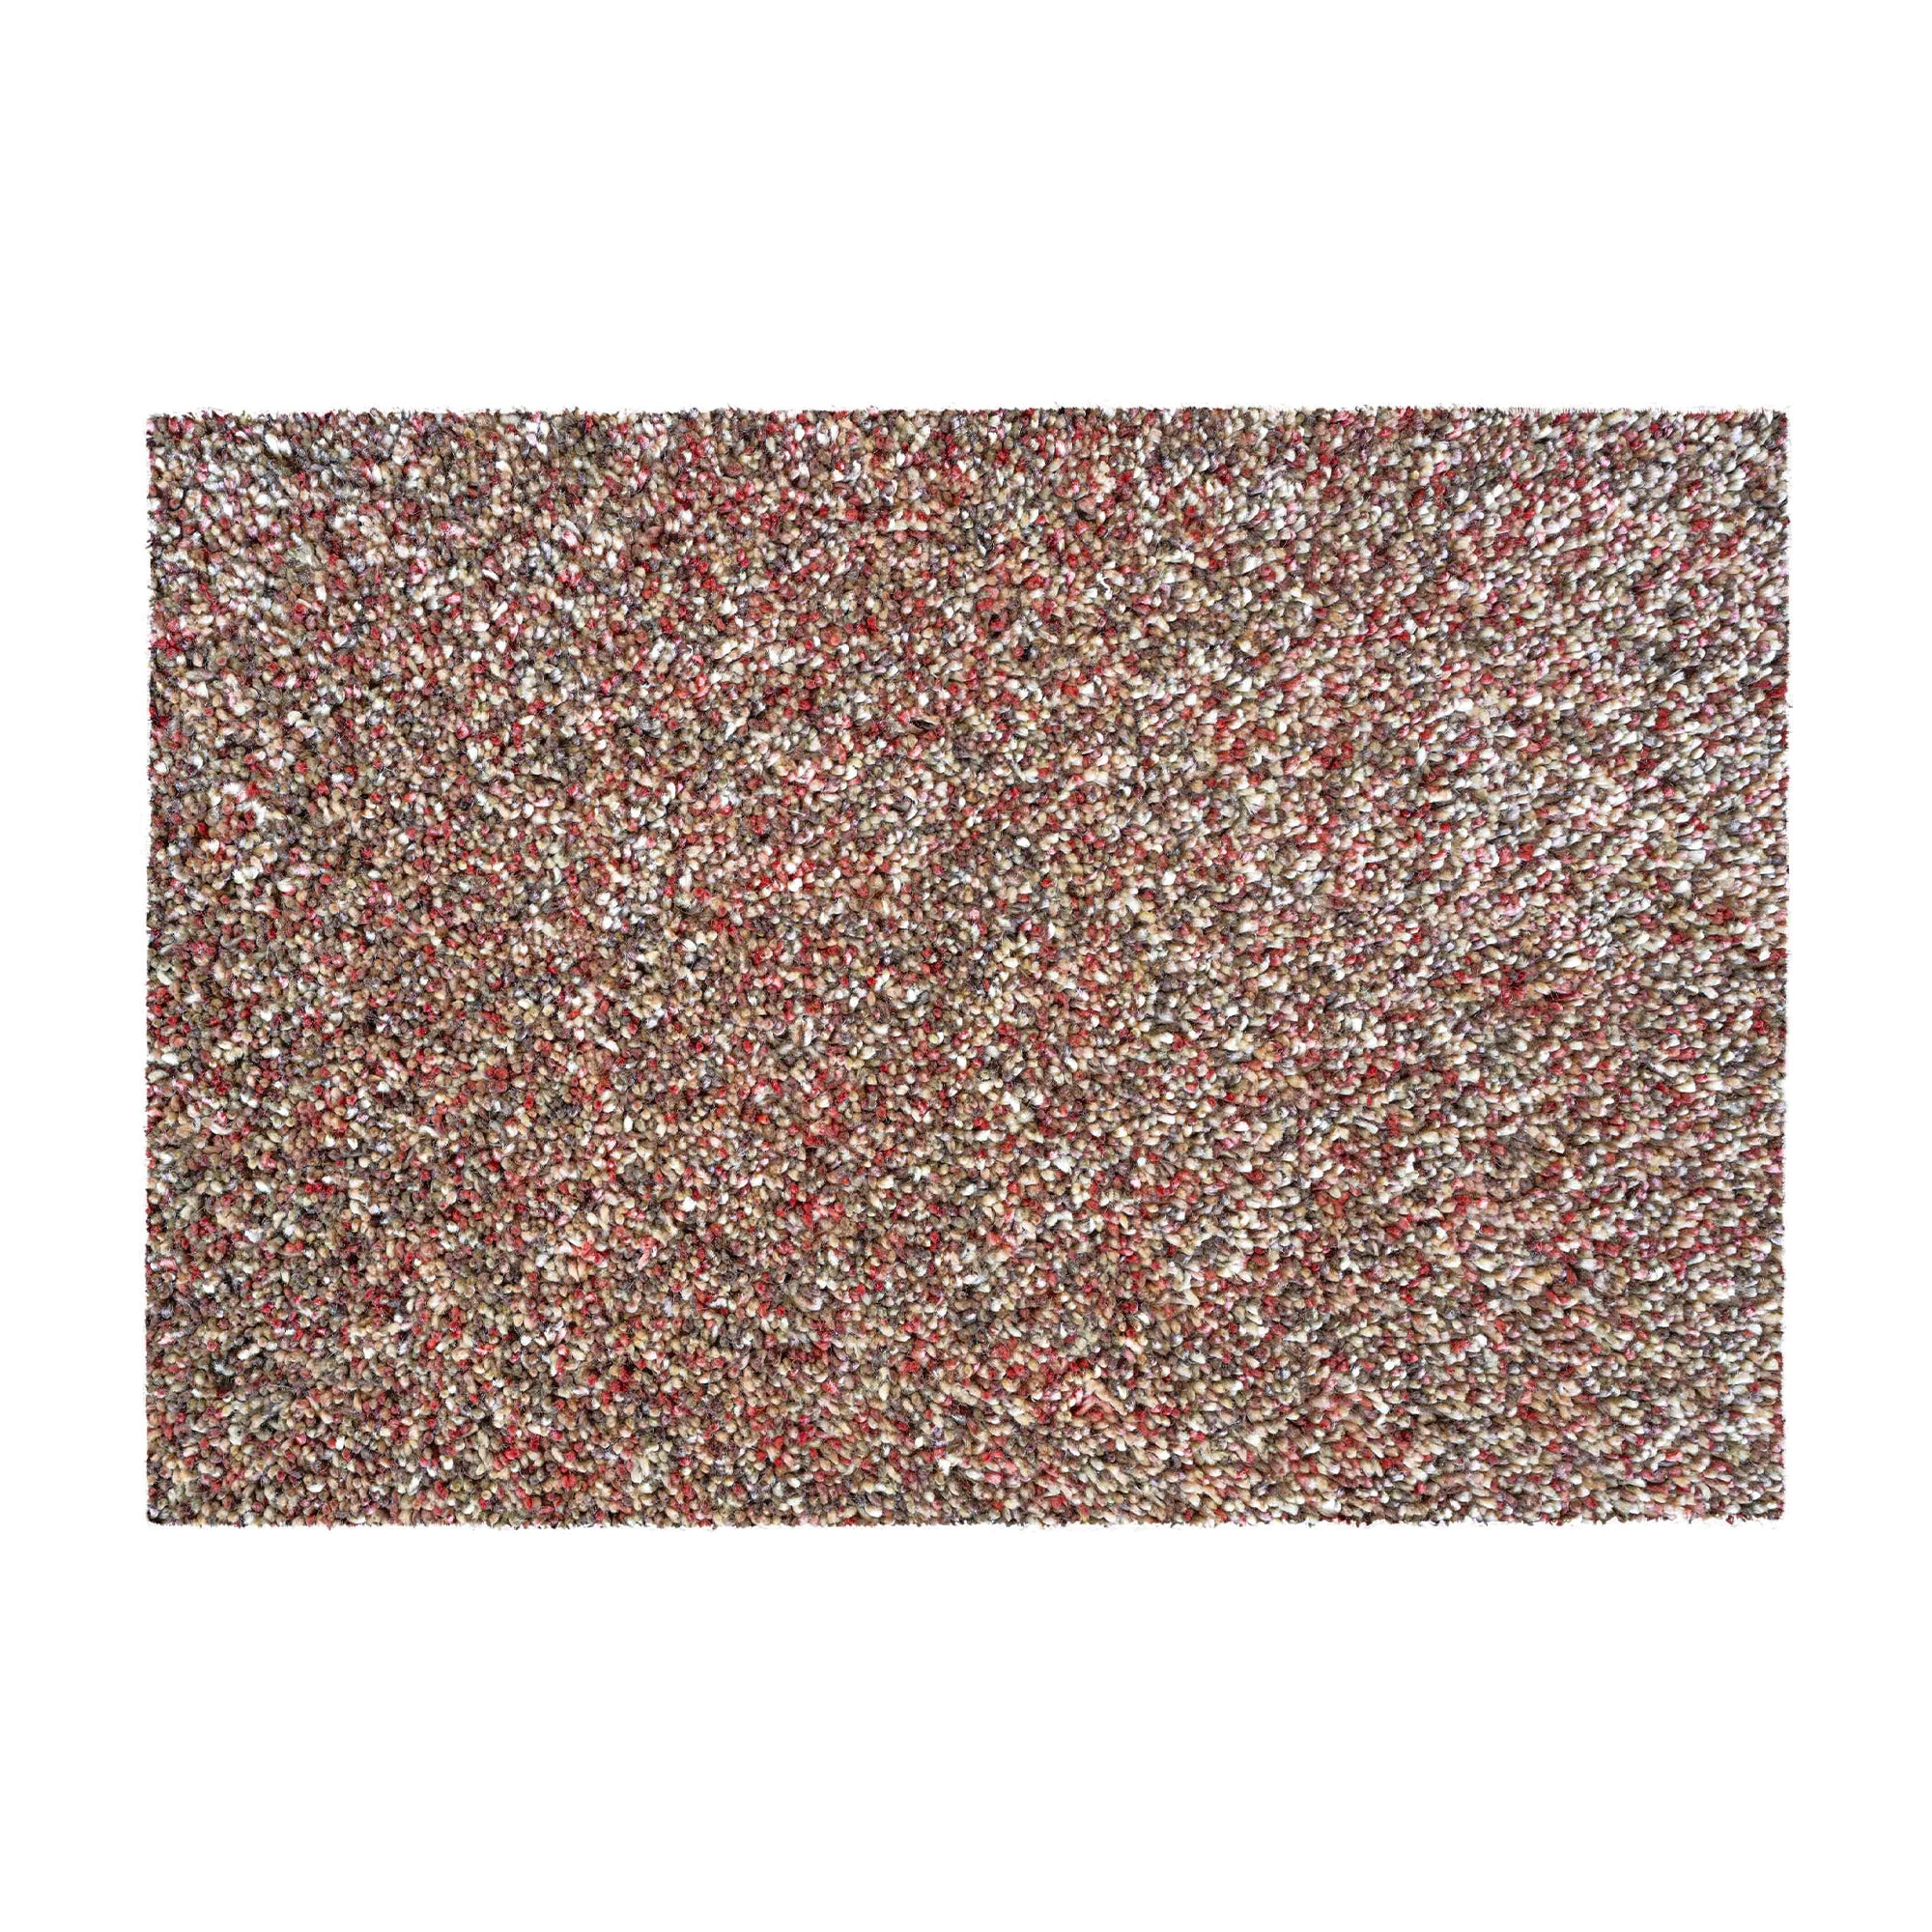 Coral Rug Red 024-0001-1121 80cm x 150cm